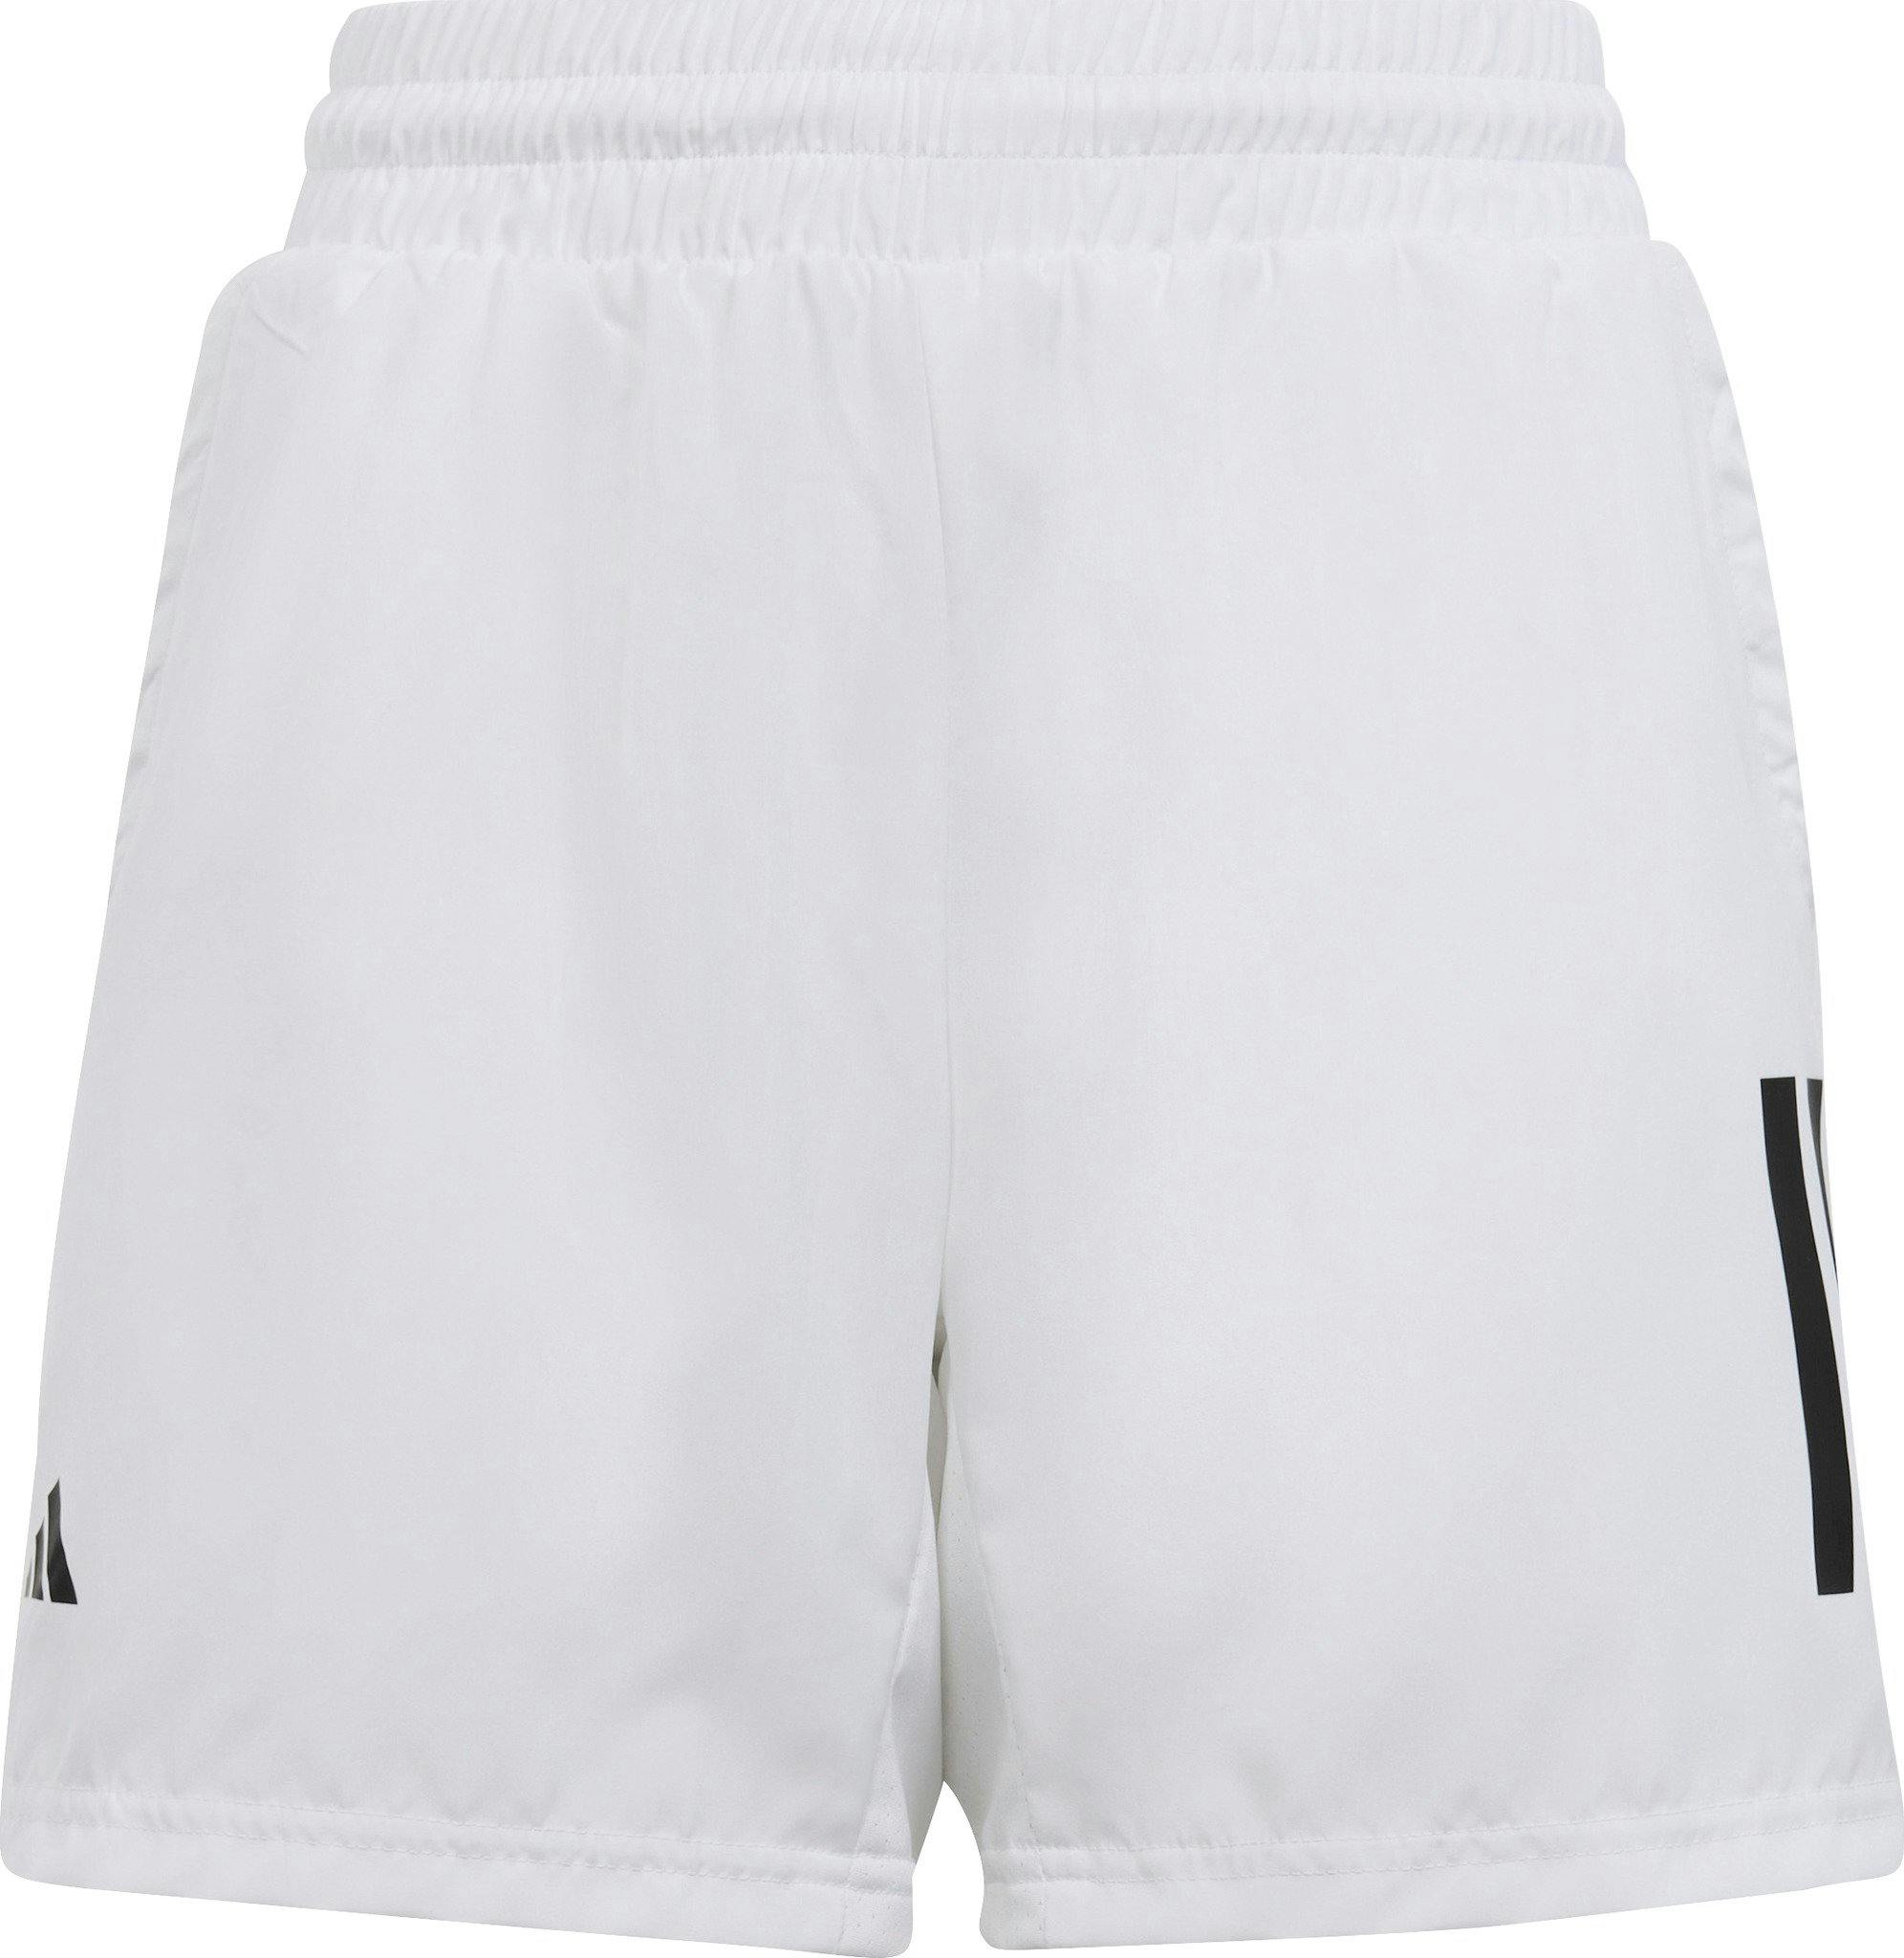 Product image for Club 3-Stripes Shorts - Youth